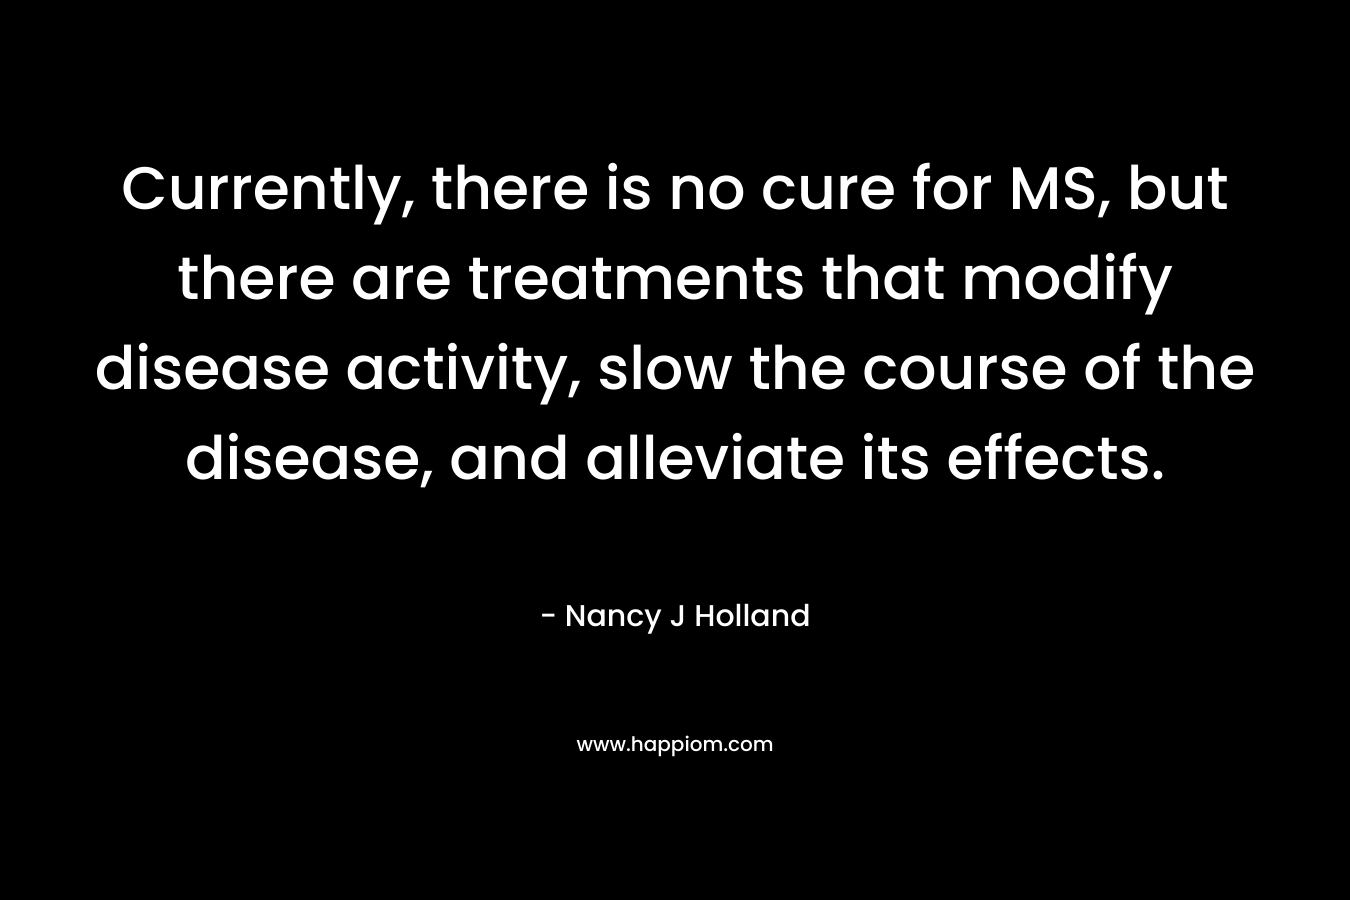 Currently, there is no cure for MS, but there are treatments that modify disease activity, slow the course of the disease, and alleviate its effects.